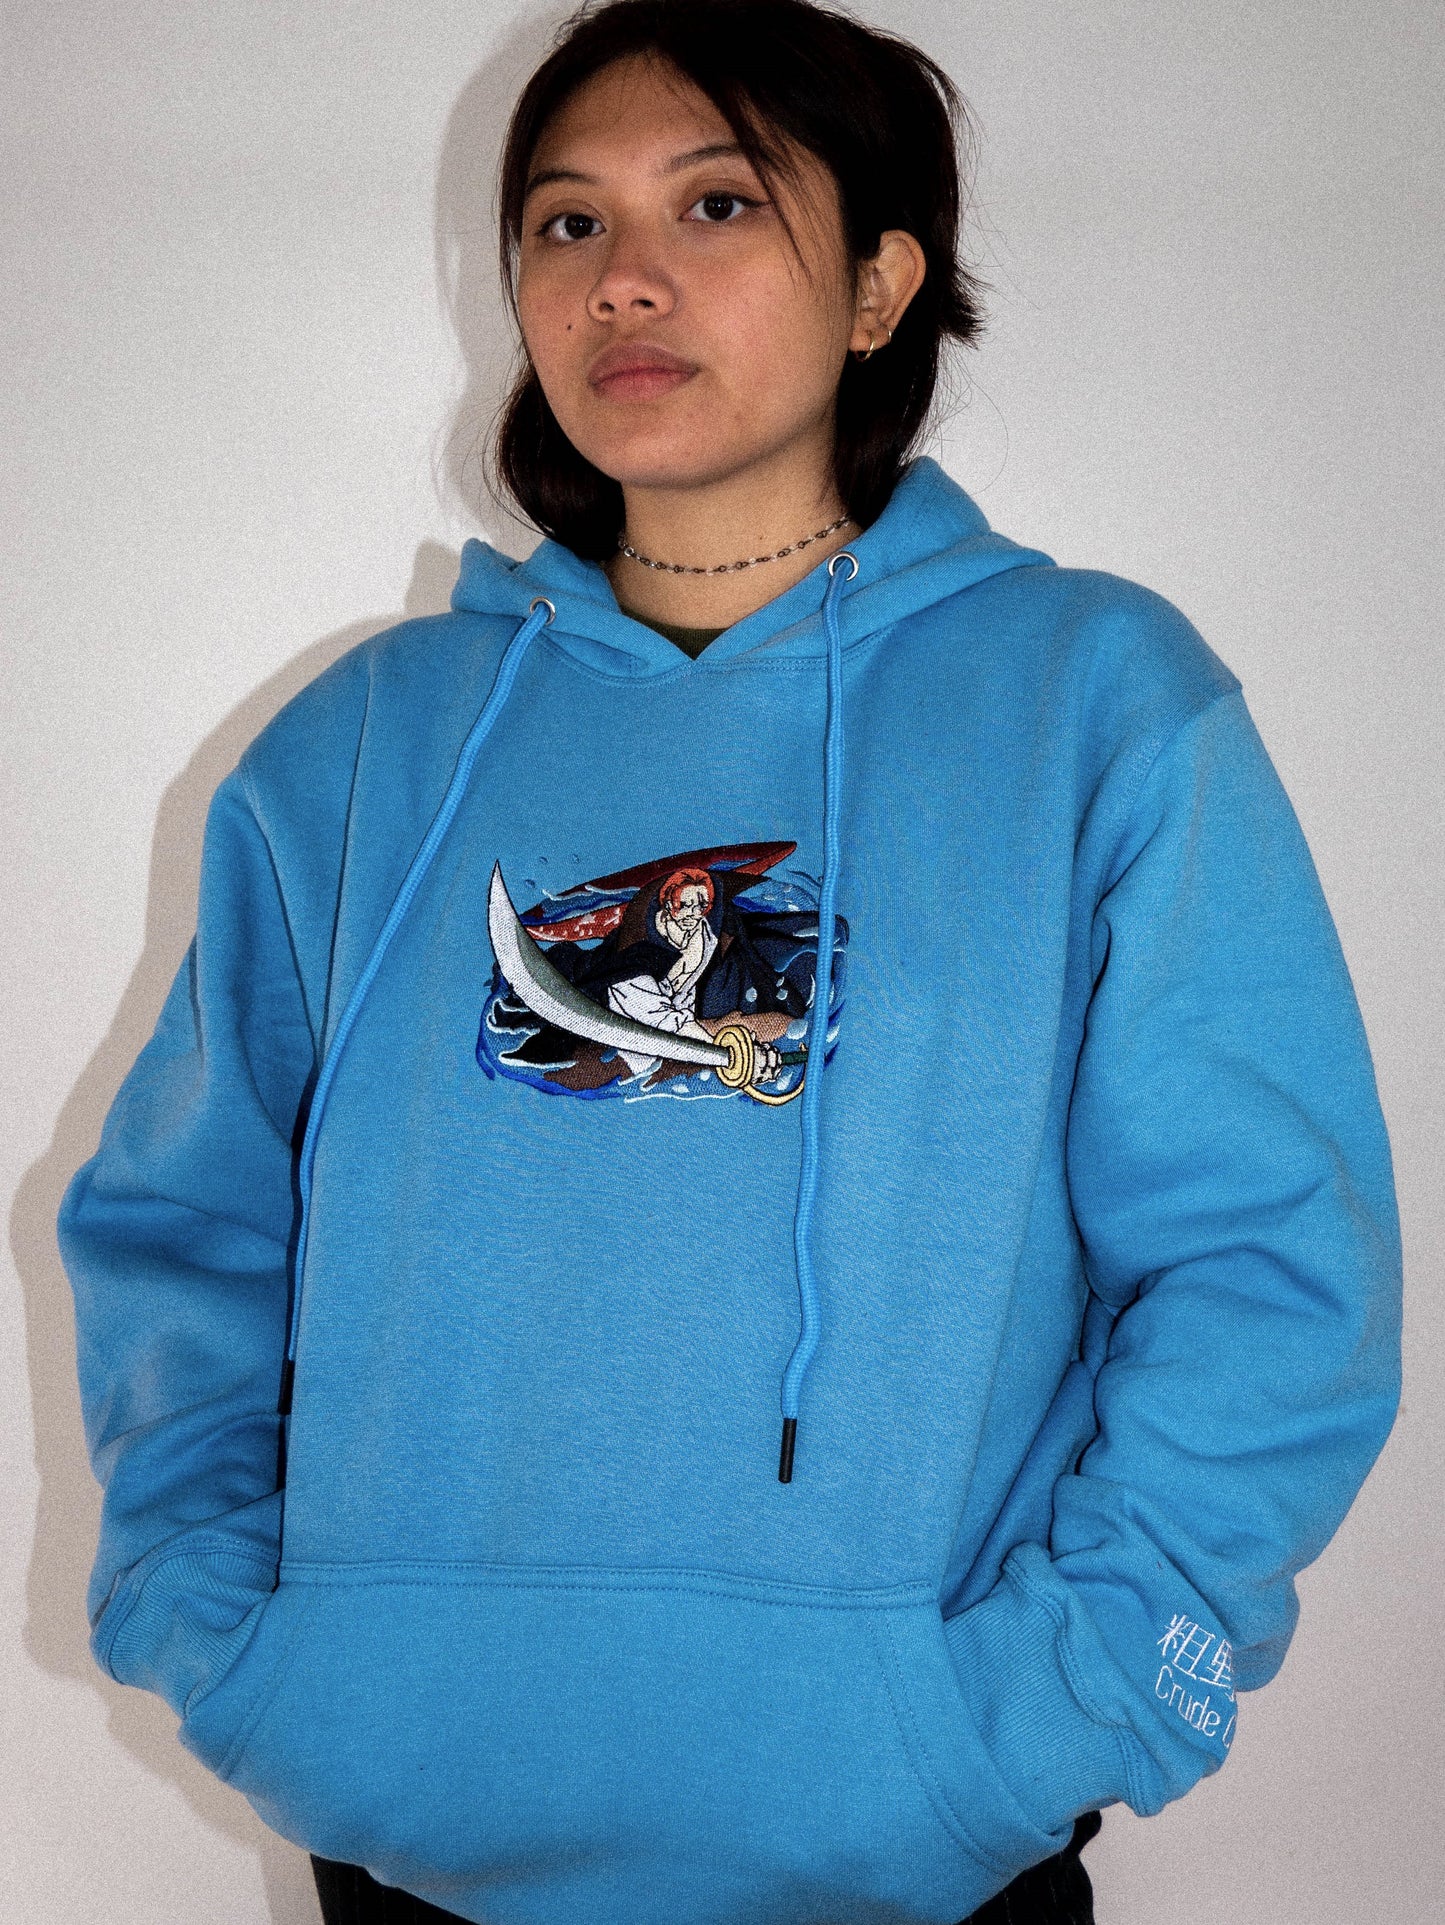 Shanks Embroidered w/ Print on Back Sky Blue Hoodie